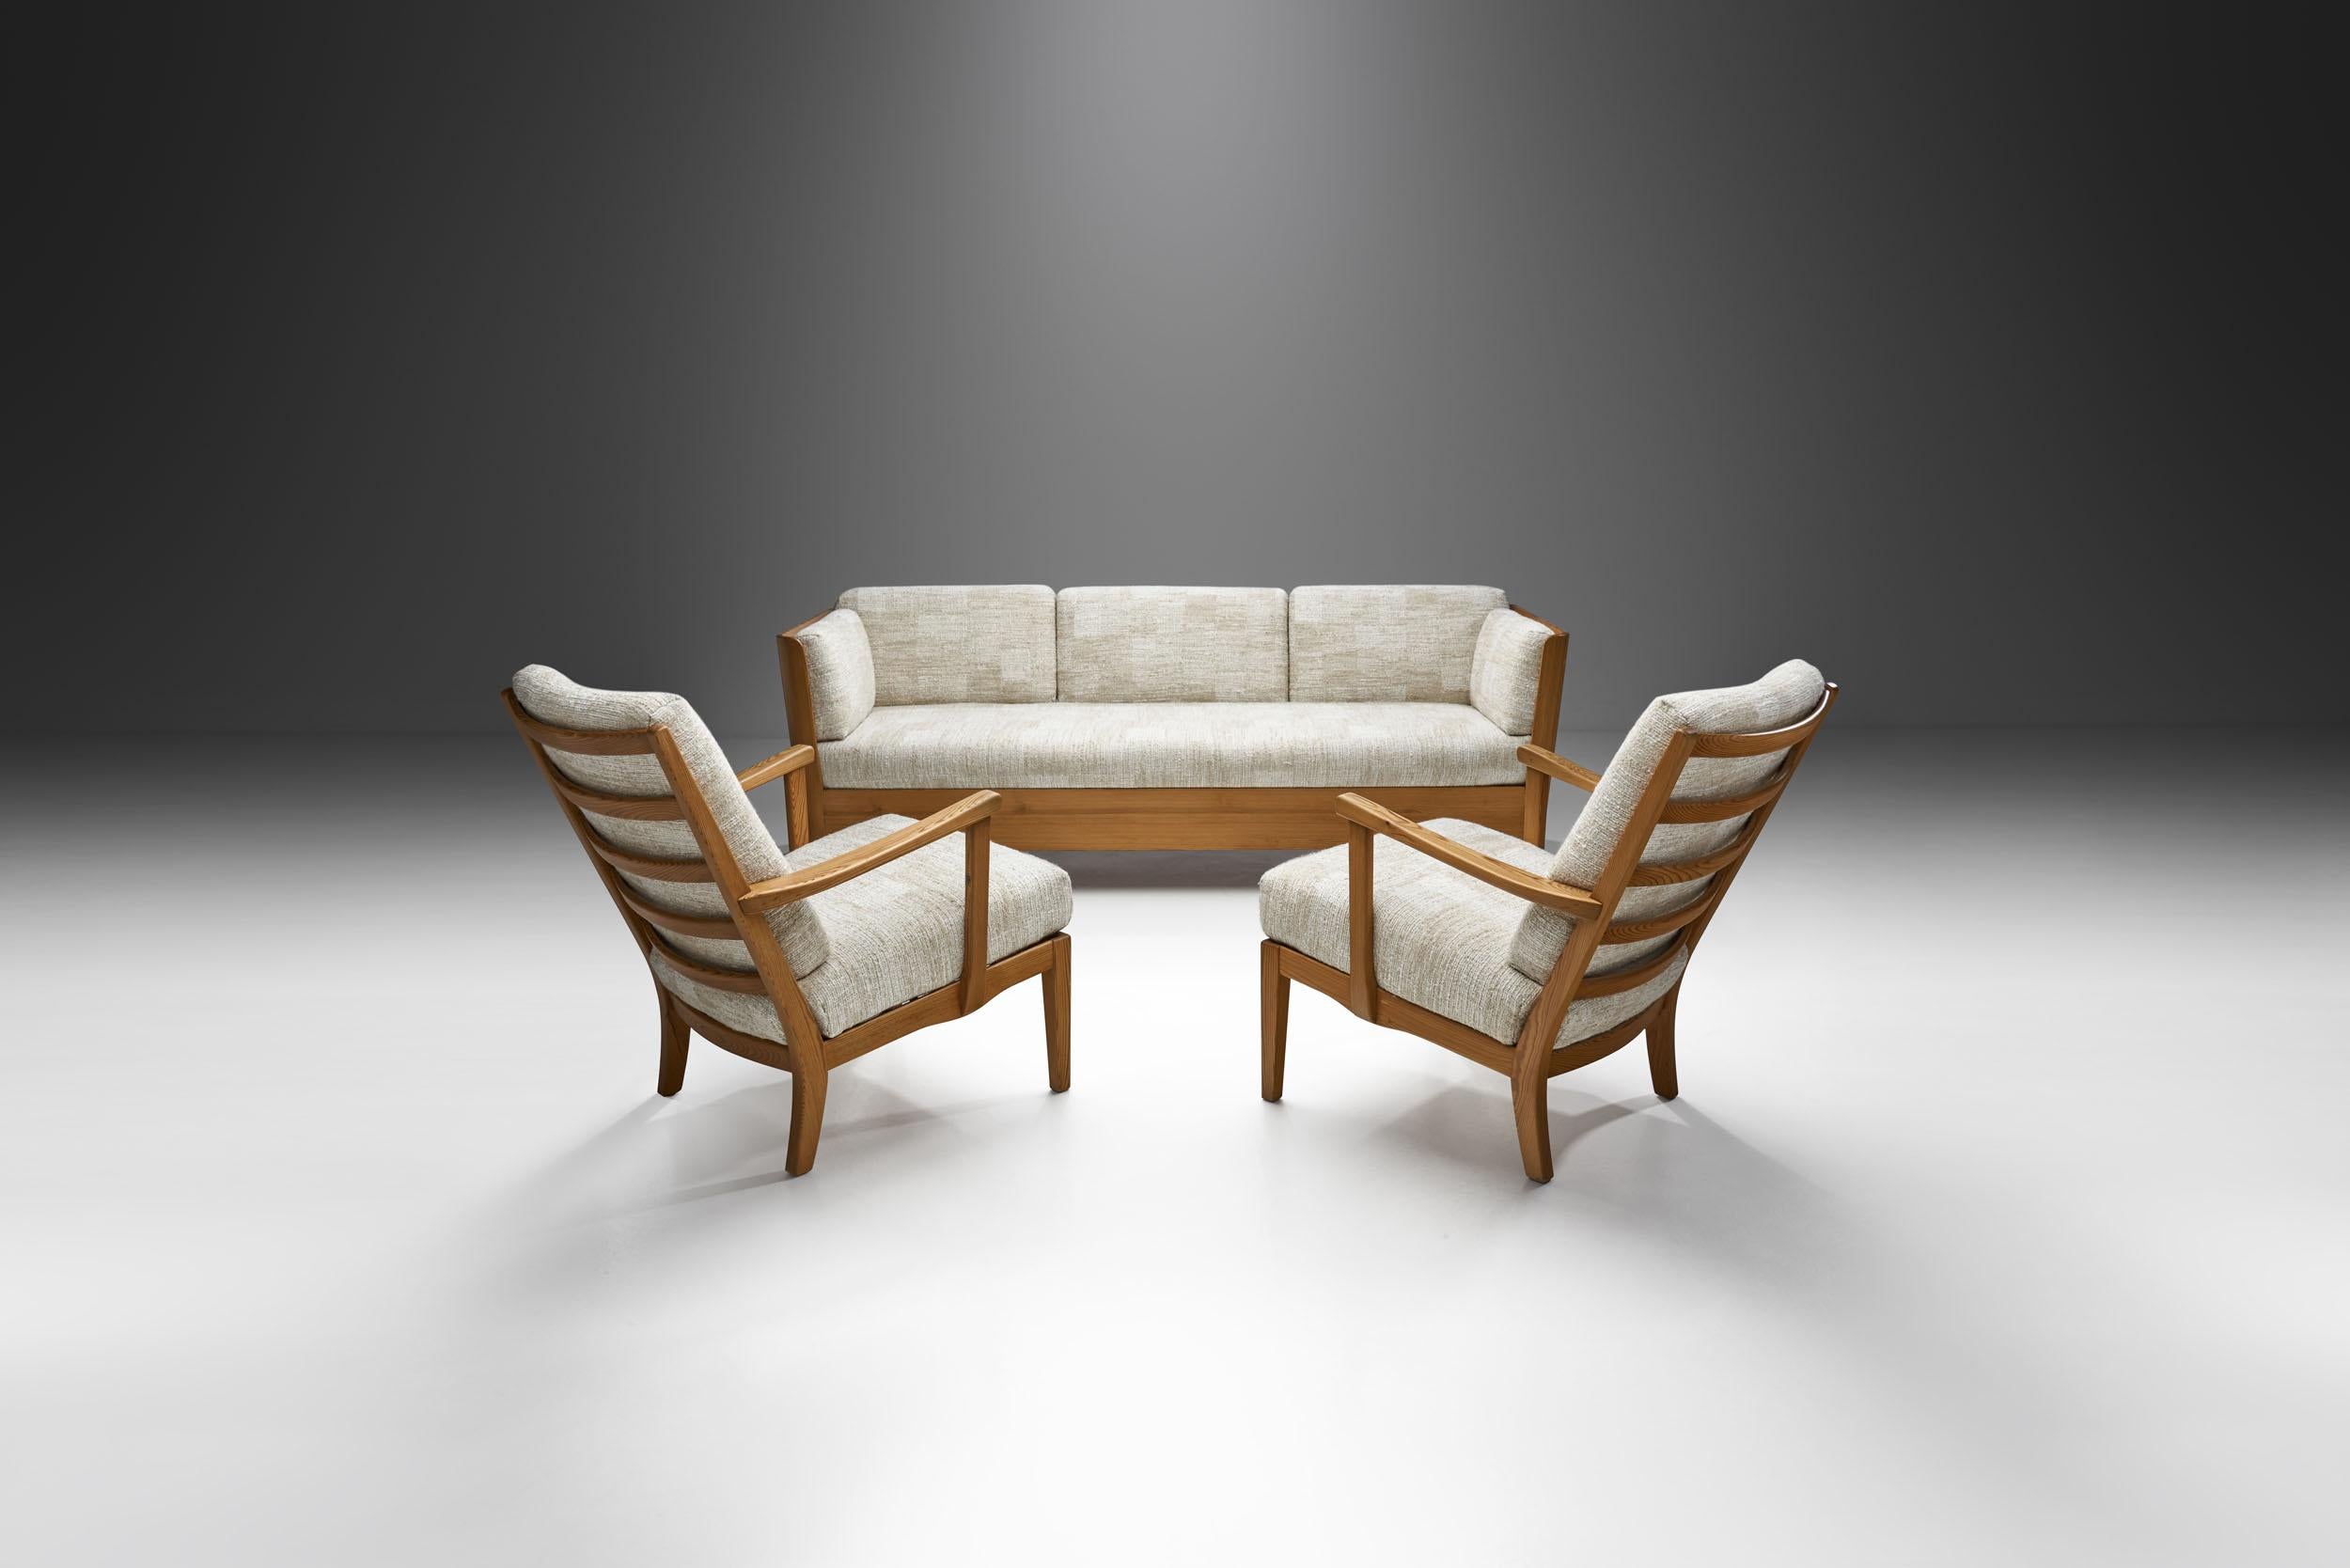 Carl Malmsten devoted his life to the renewal of traditional Swedish craftsmanship, inspired by the cultural examples of the Swedish country manor and rustic styles – furniture endowed with a creative simplicity, with a feeling for the wood itself,